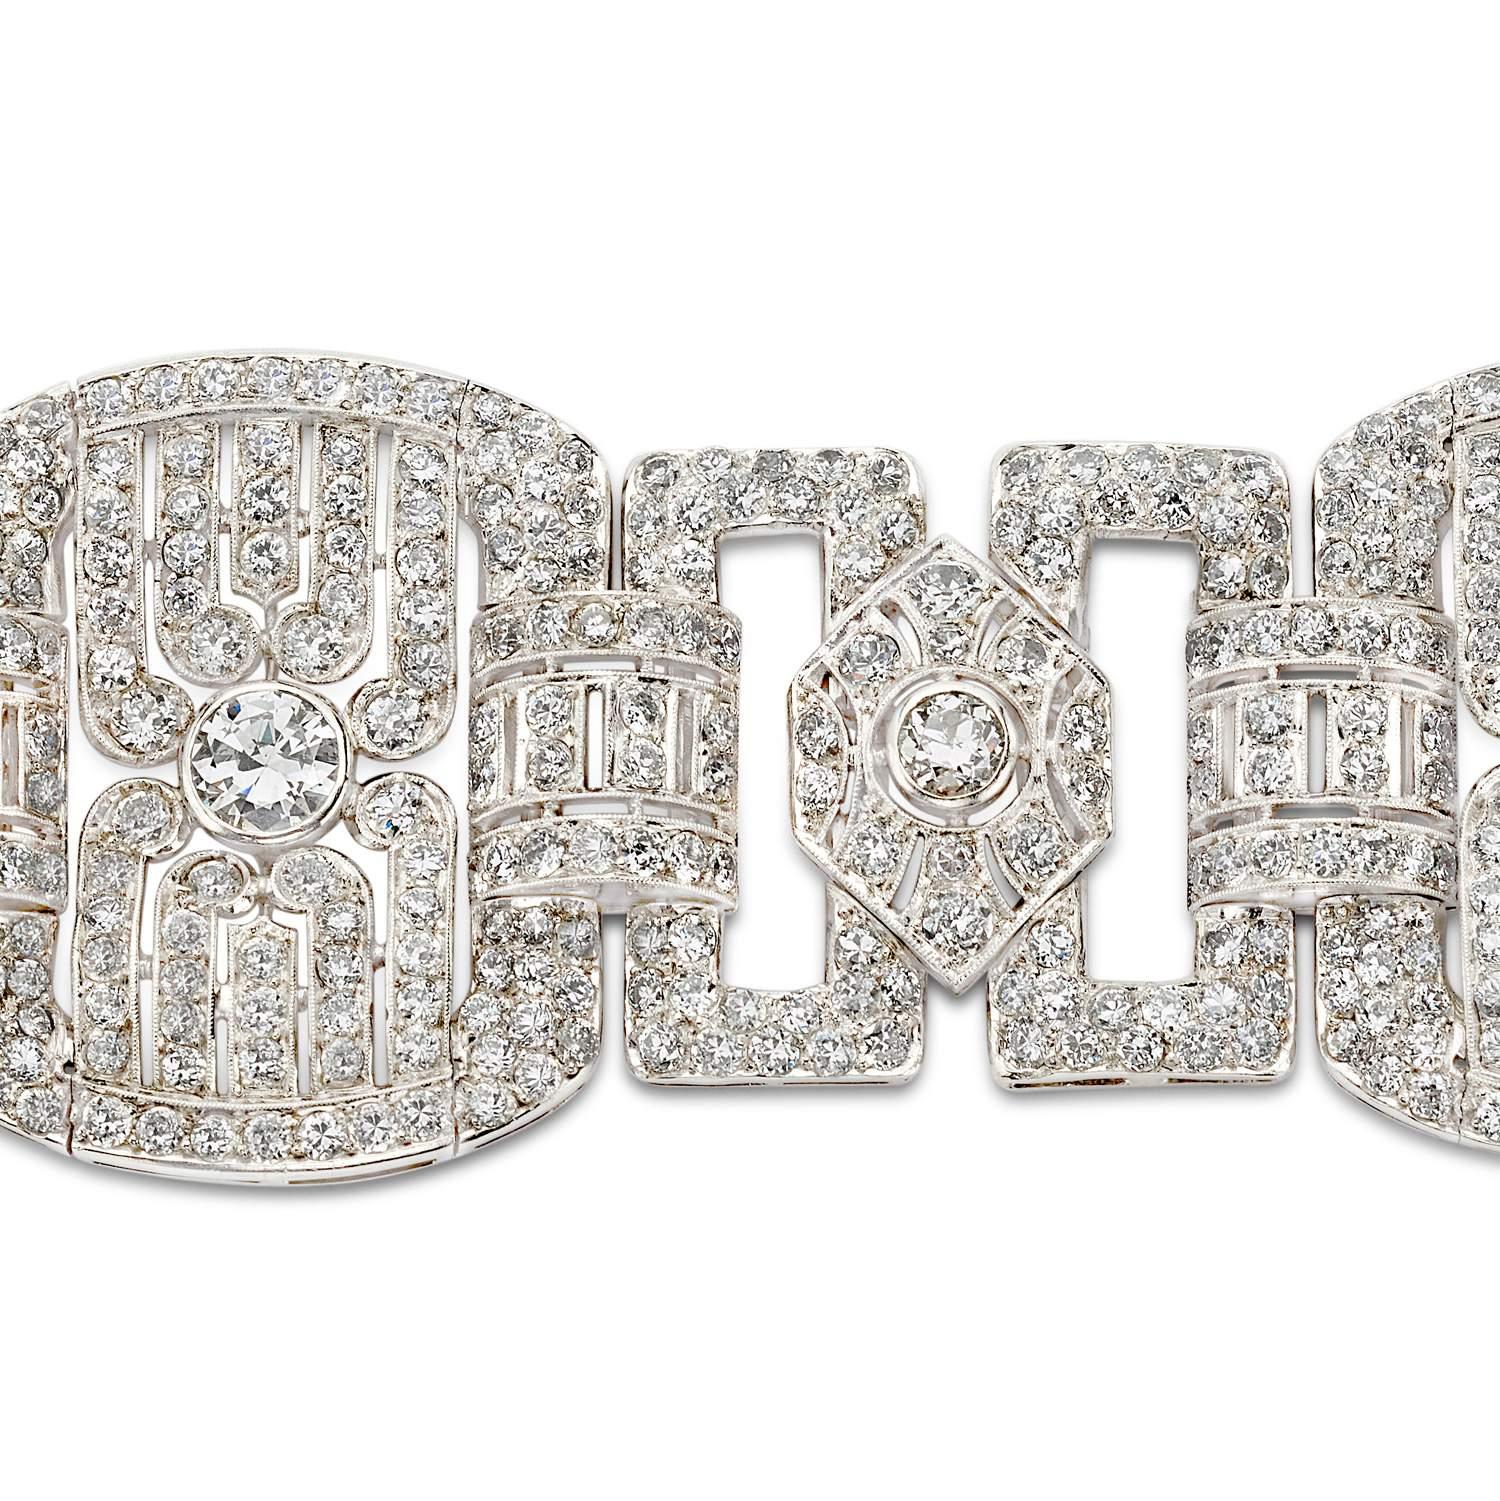 This Art Deco Bracelet Has 37.5 CTW Of Diamonds. The Bracelet Has 672 Round Pave Diamonds 33.00 CTS, 3 Round Diamonds 1.50 CTS  On The Smaller Stations And 3 Round Diamonds 3.00 CTS On The Larger Sections.